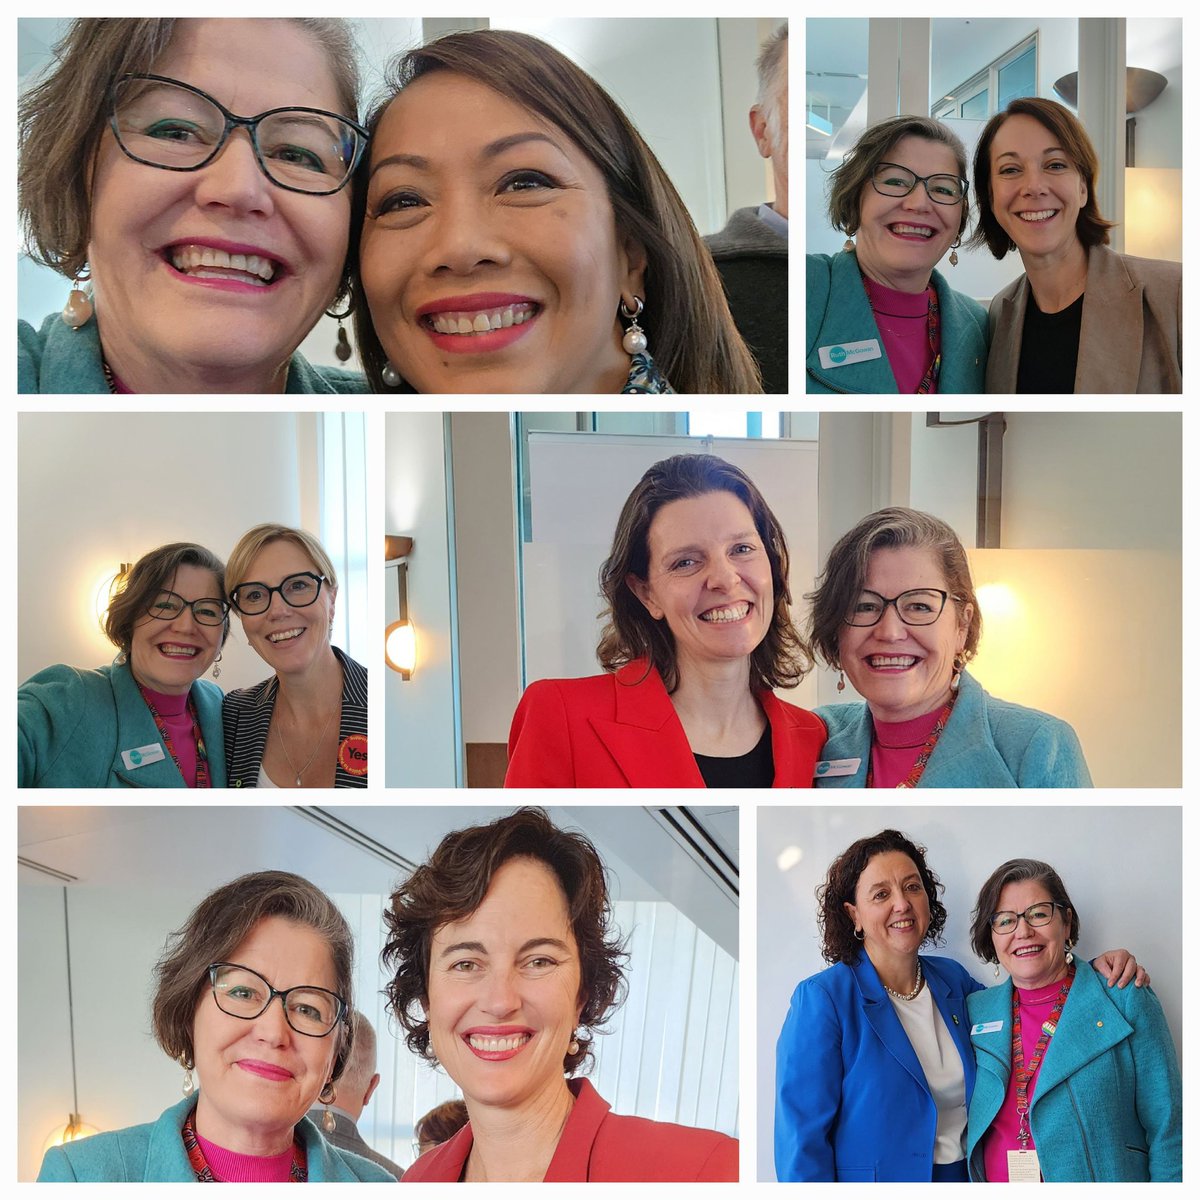 So grateful to meet IRL, some of the fabulous Federal Independent #WomenInPolitics that I've followed forever and admire so much.
A few fangirl selfies from Parli today 🤩
With MPs Dai Le, @SophieScamps  @spenderallegra, @Mon4Kooyong @ChaneyforCurtin @zdaniel

#GetElected 💪🙏🏻❤️